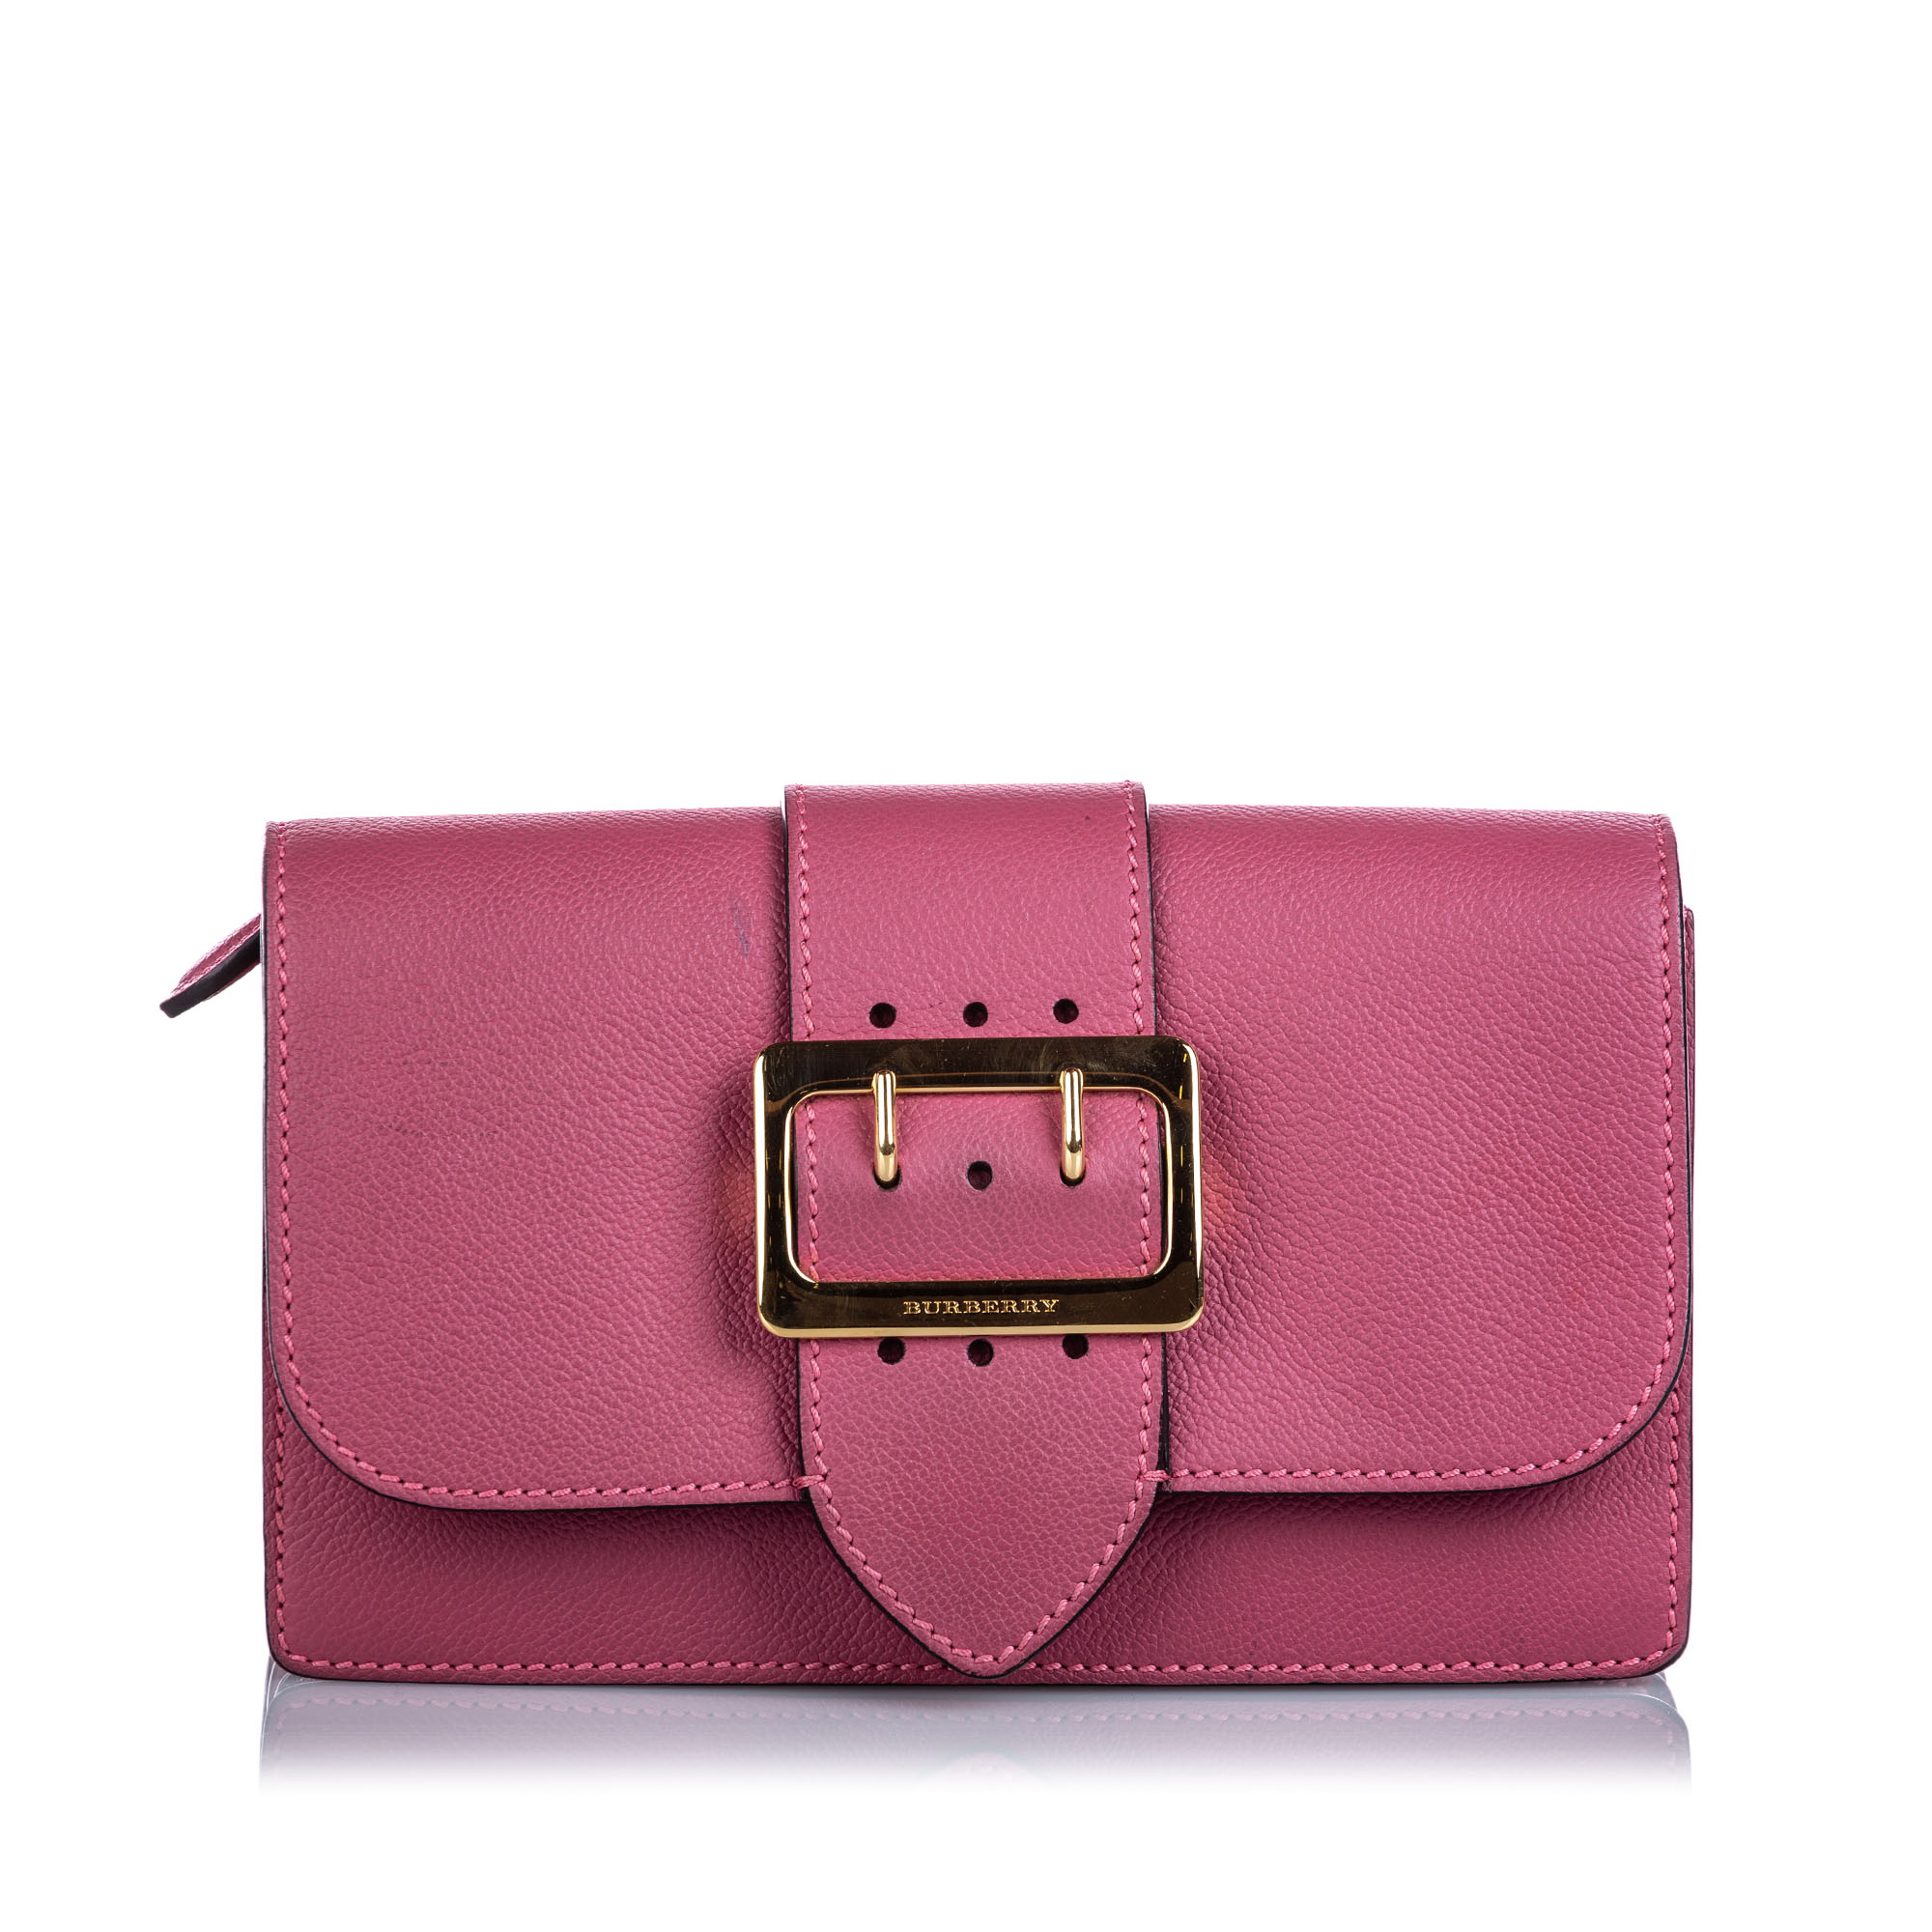 Pre-Loved Burberry Pink Calf Leather Buckle Crossbody Bag ITALY | eBay